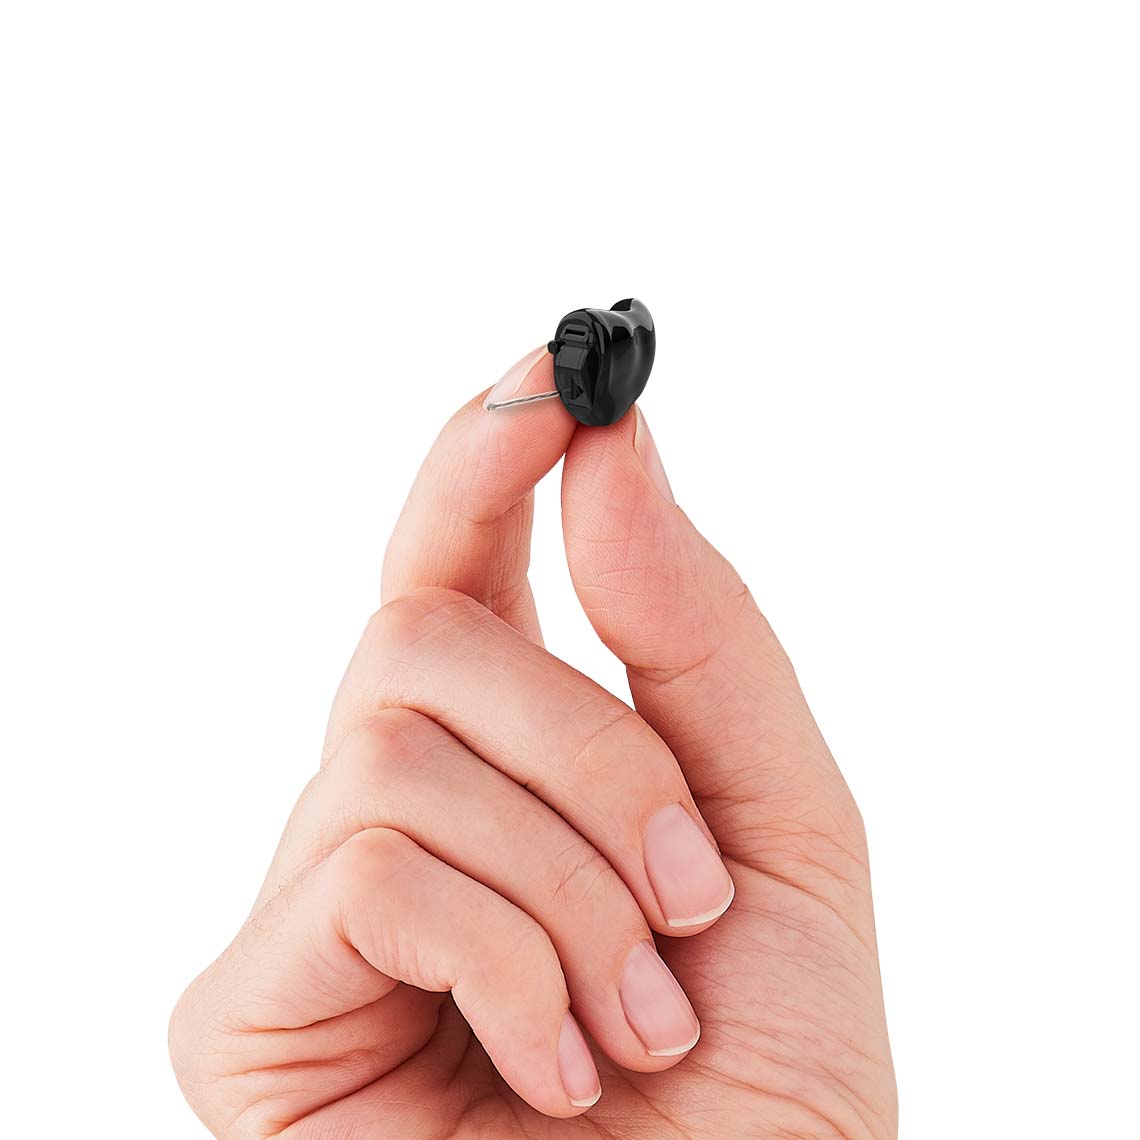 A CIC hearing aid being held in a hand